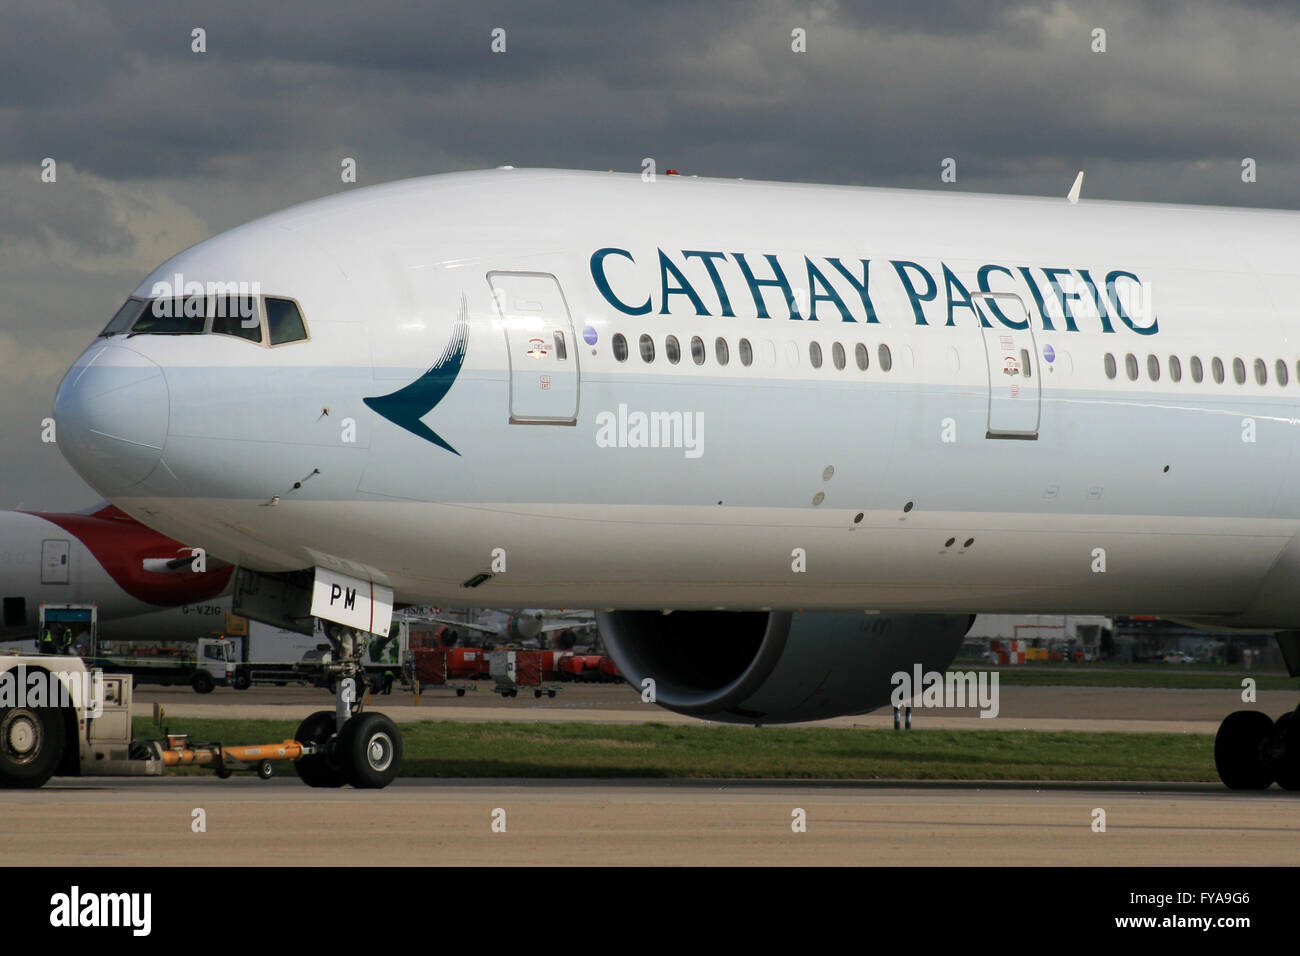 CATHAY PACIFIC Stock Photo